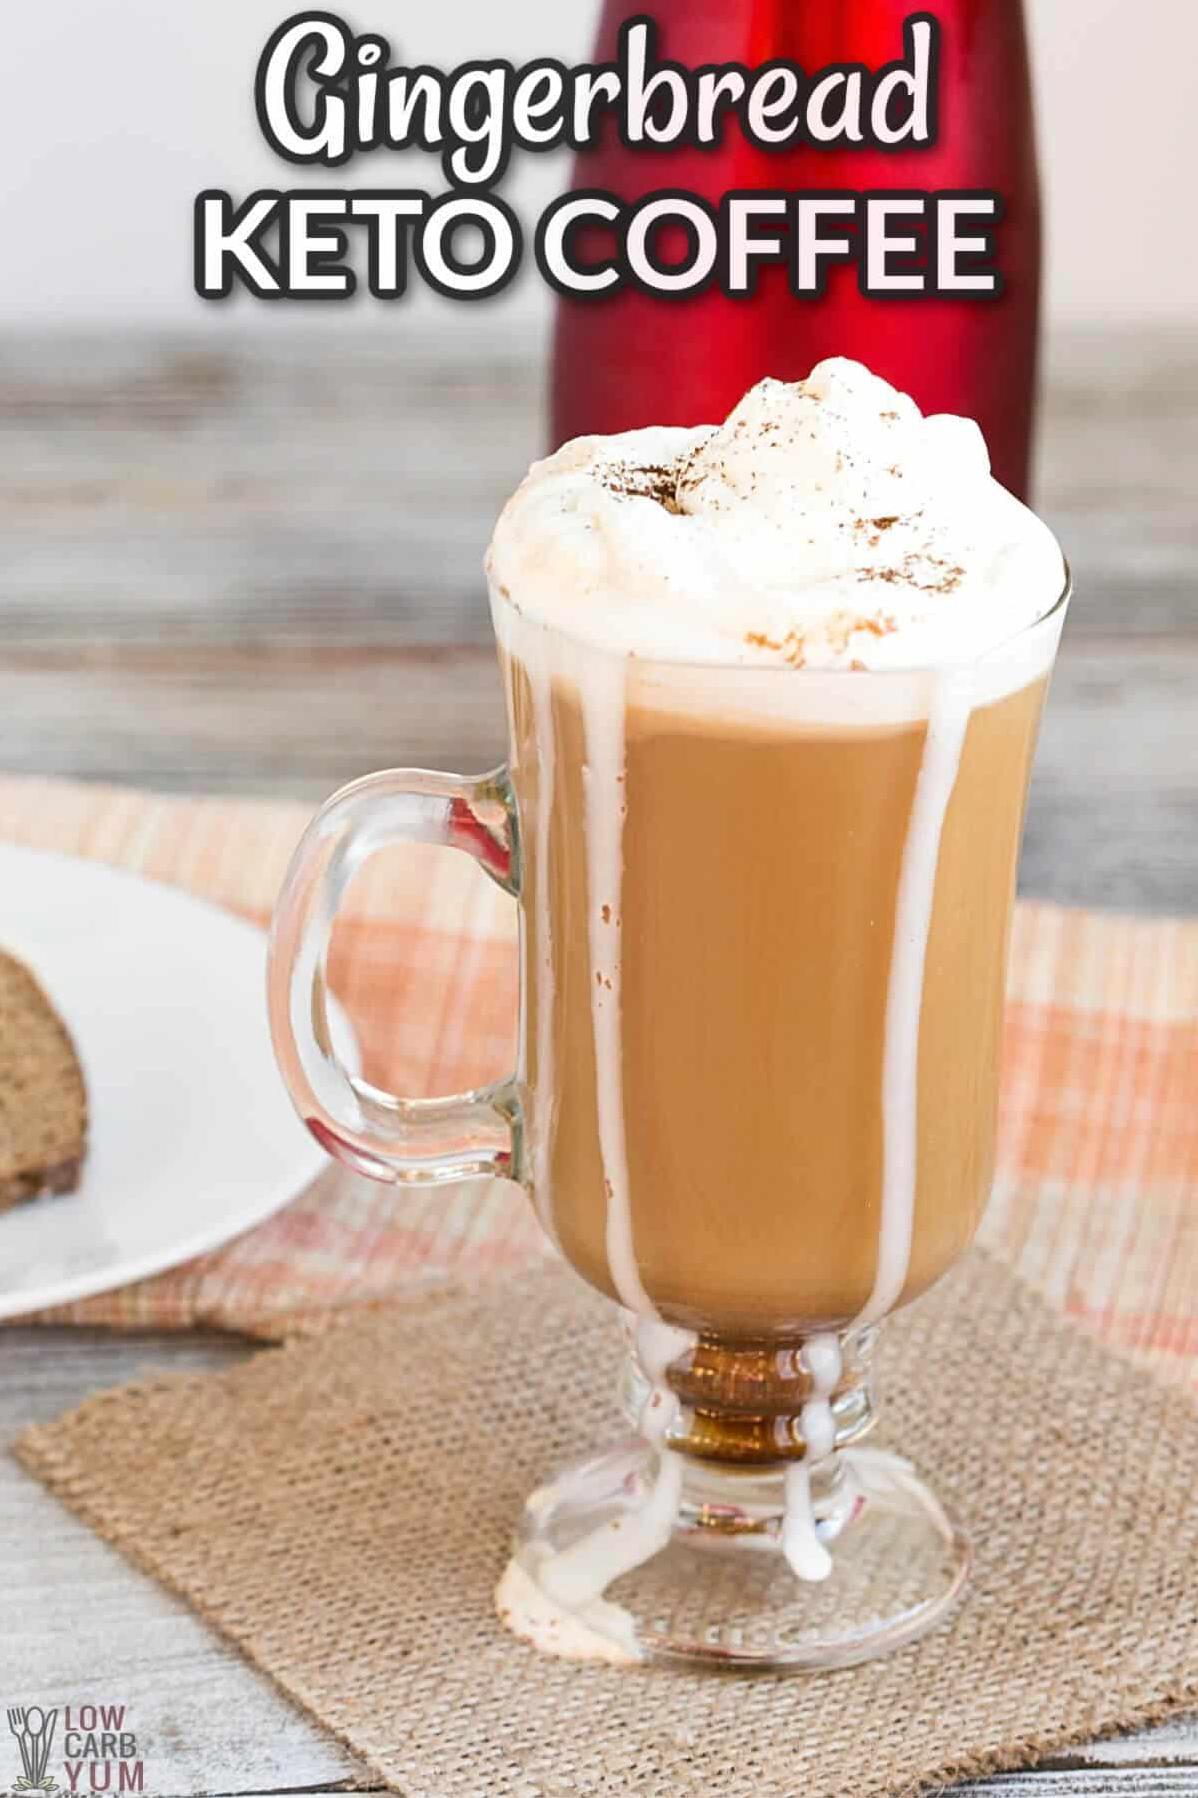  Give your taste buds a spicy surprise with this ginger coffee recipe.